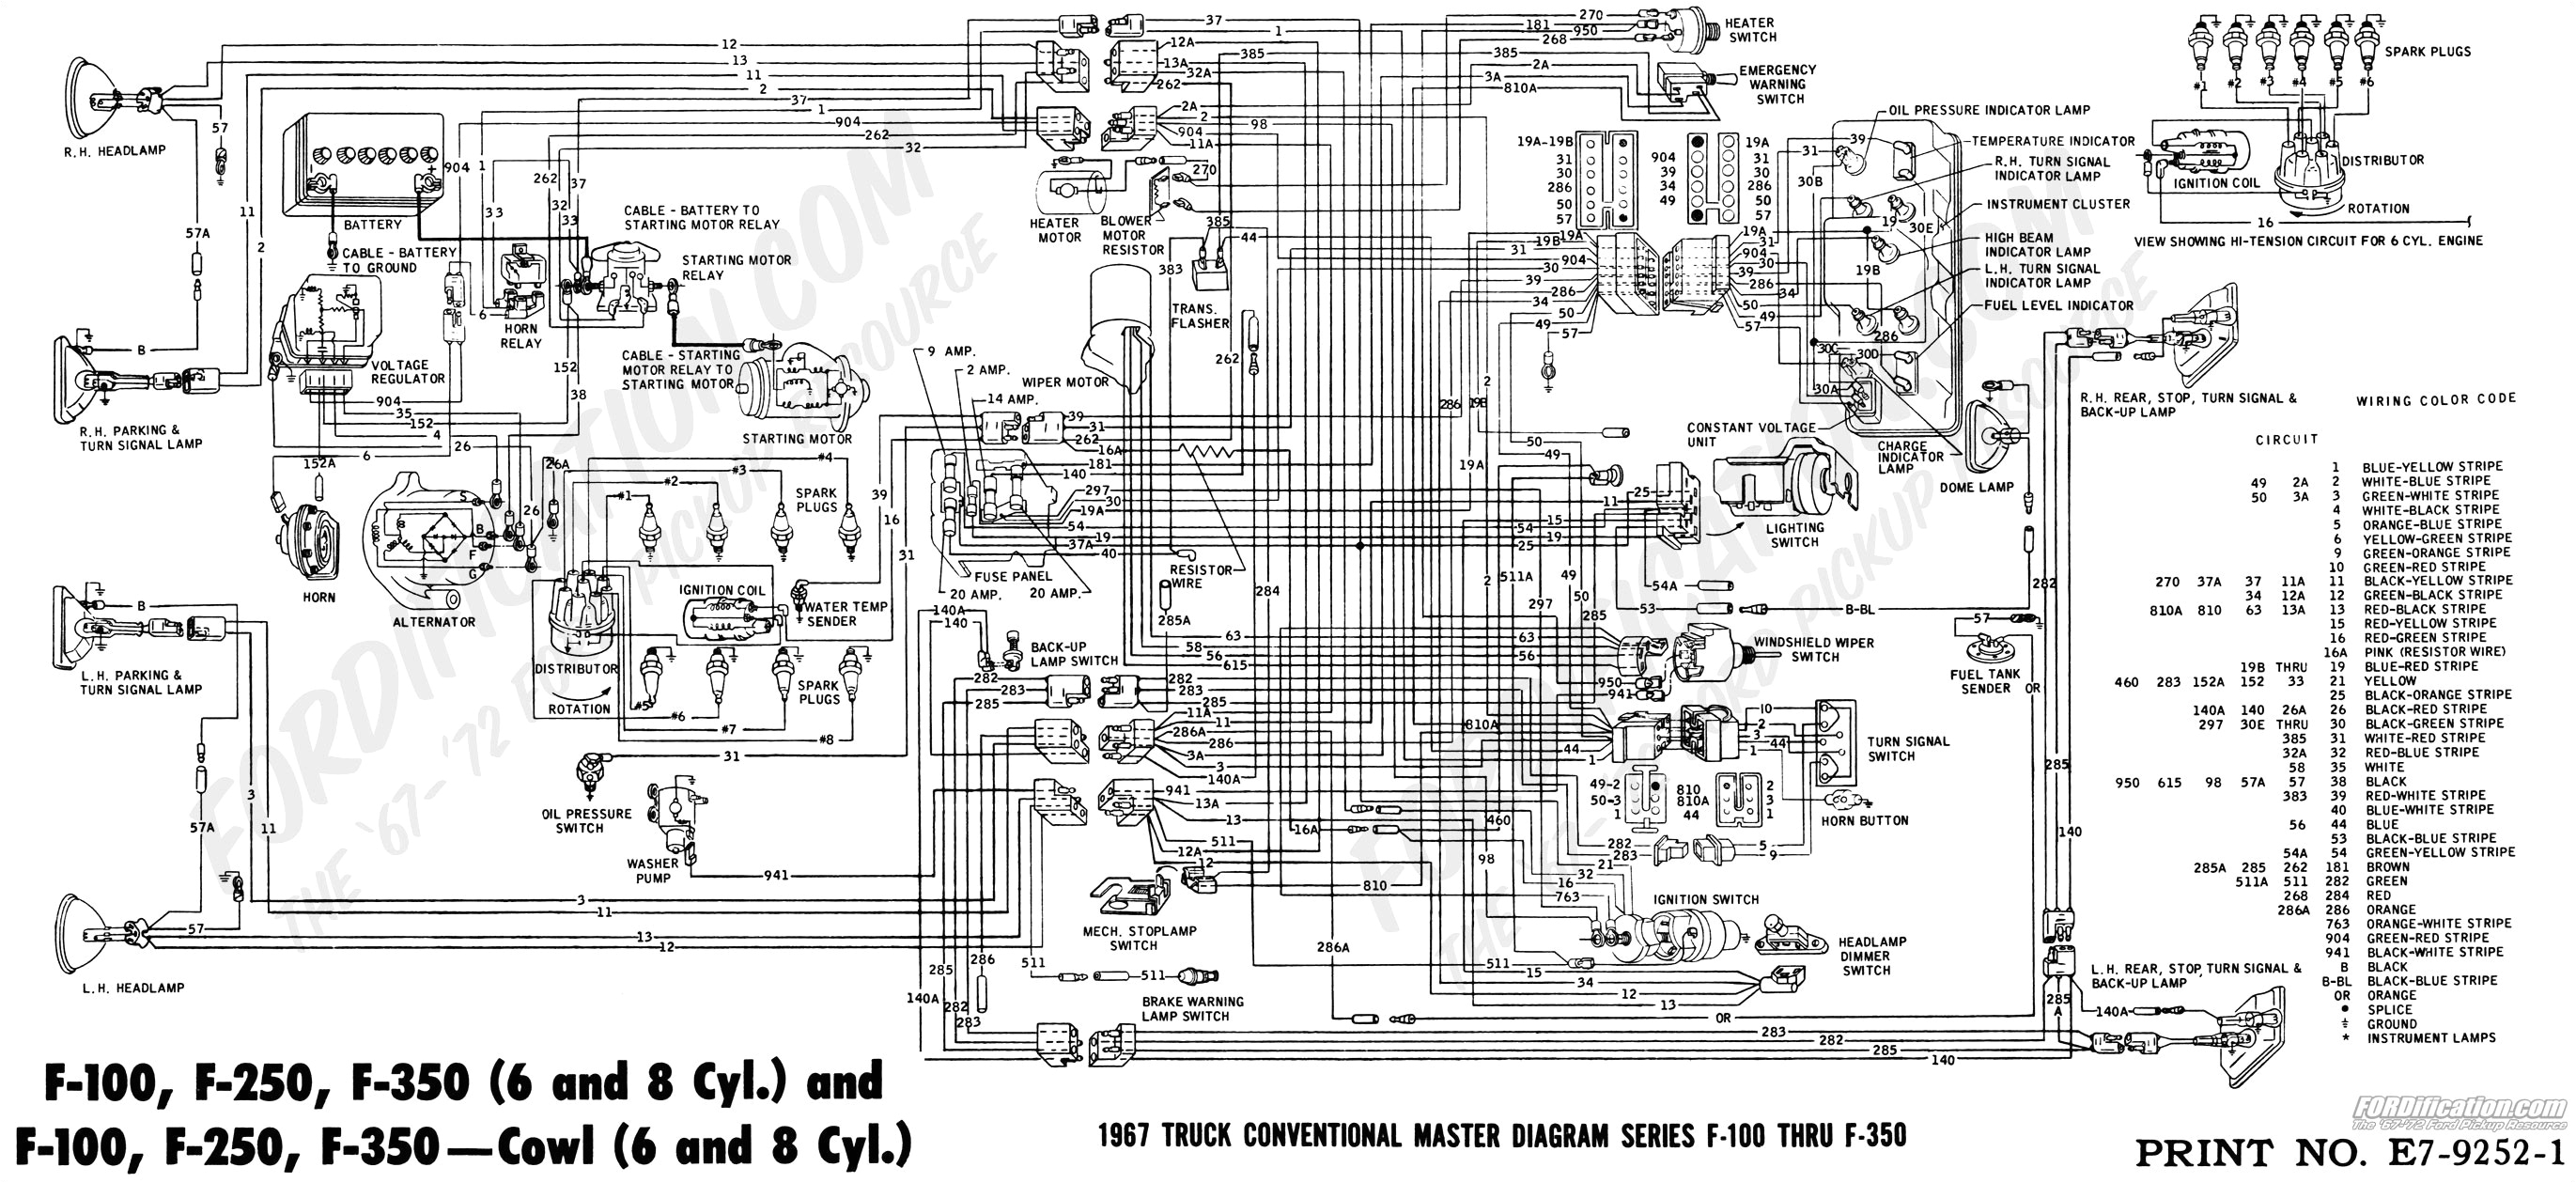 69 F100 Wiring Diagram 1969 ford F 250 Wiring Diagram Wiring Diagram Sys